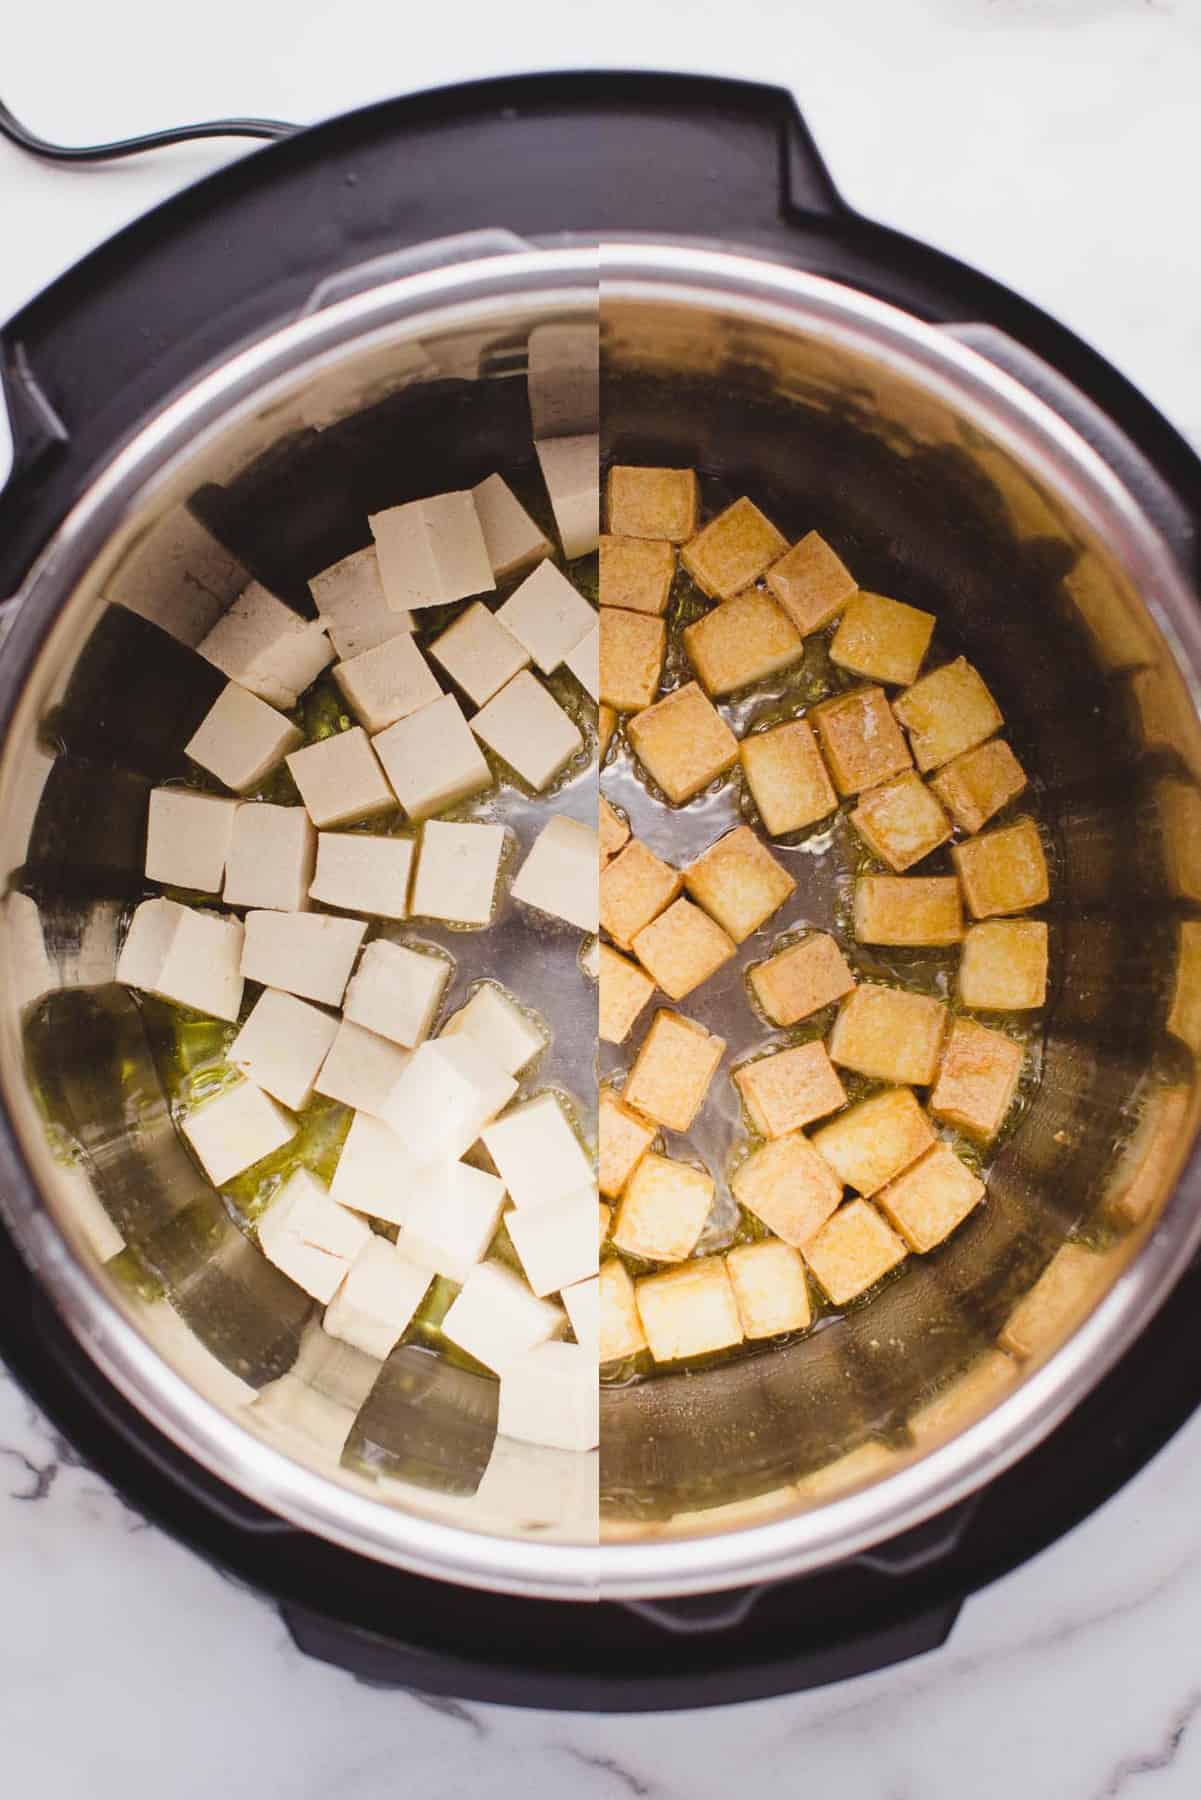 Cooking tofu in an Instant Pot.